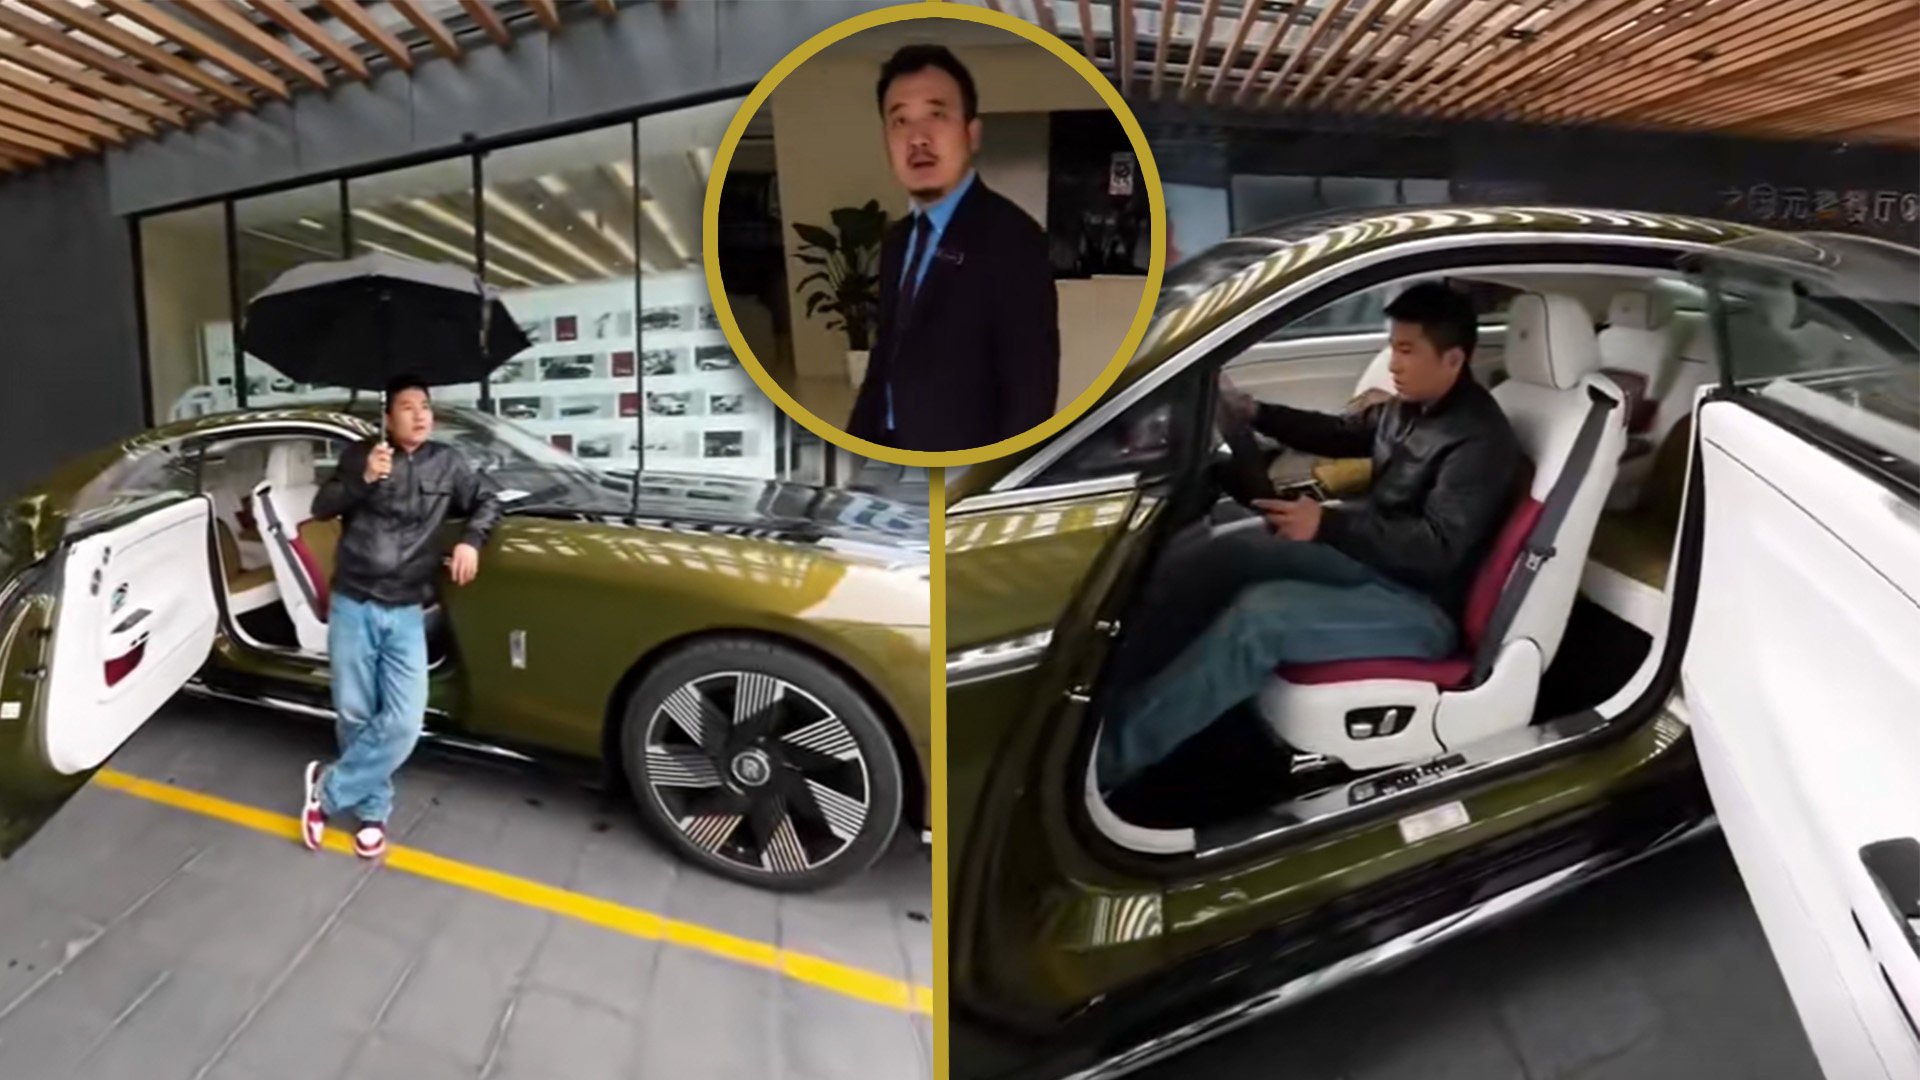 A Rolls-Royce seller in China has allowed a man of modest means to sit inside his favourite luxury car while telling him if he works hard he could own such a vehicle one day. Photo: SCMP composite/Douyin